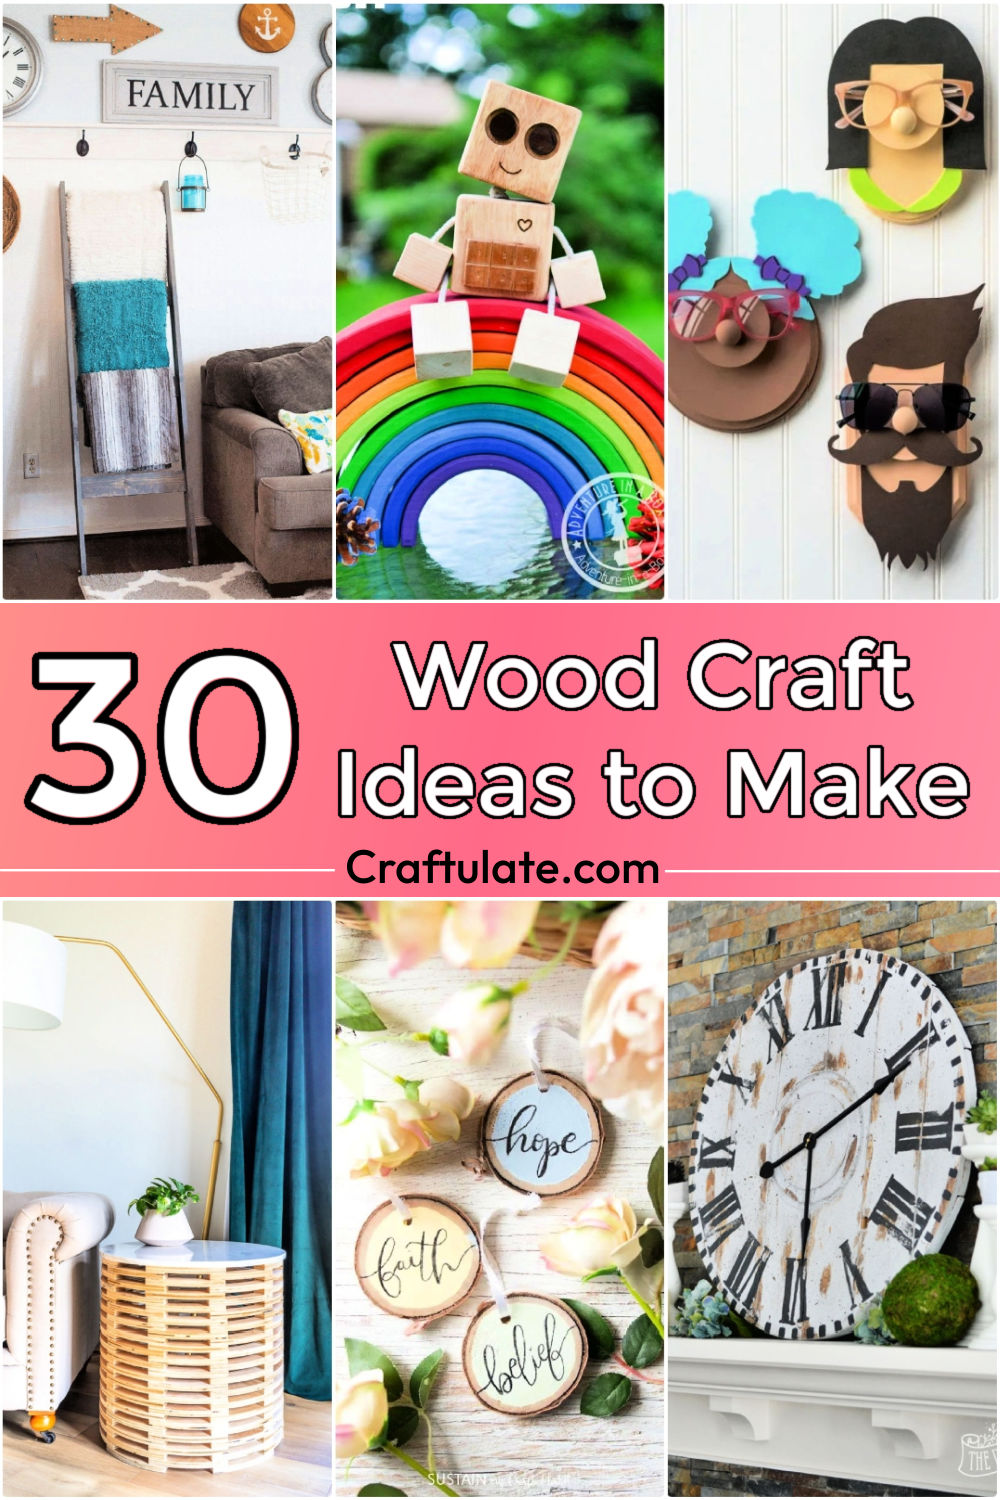 30 Simple Wood Craft Ideas to Make - Craftulate